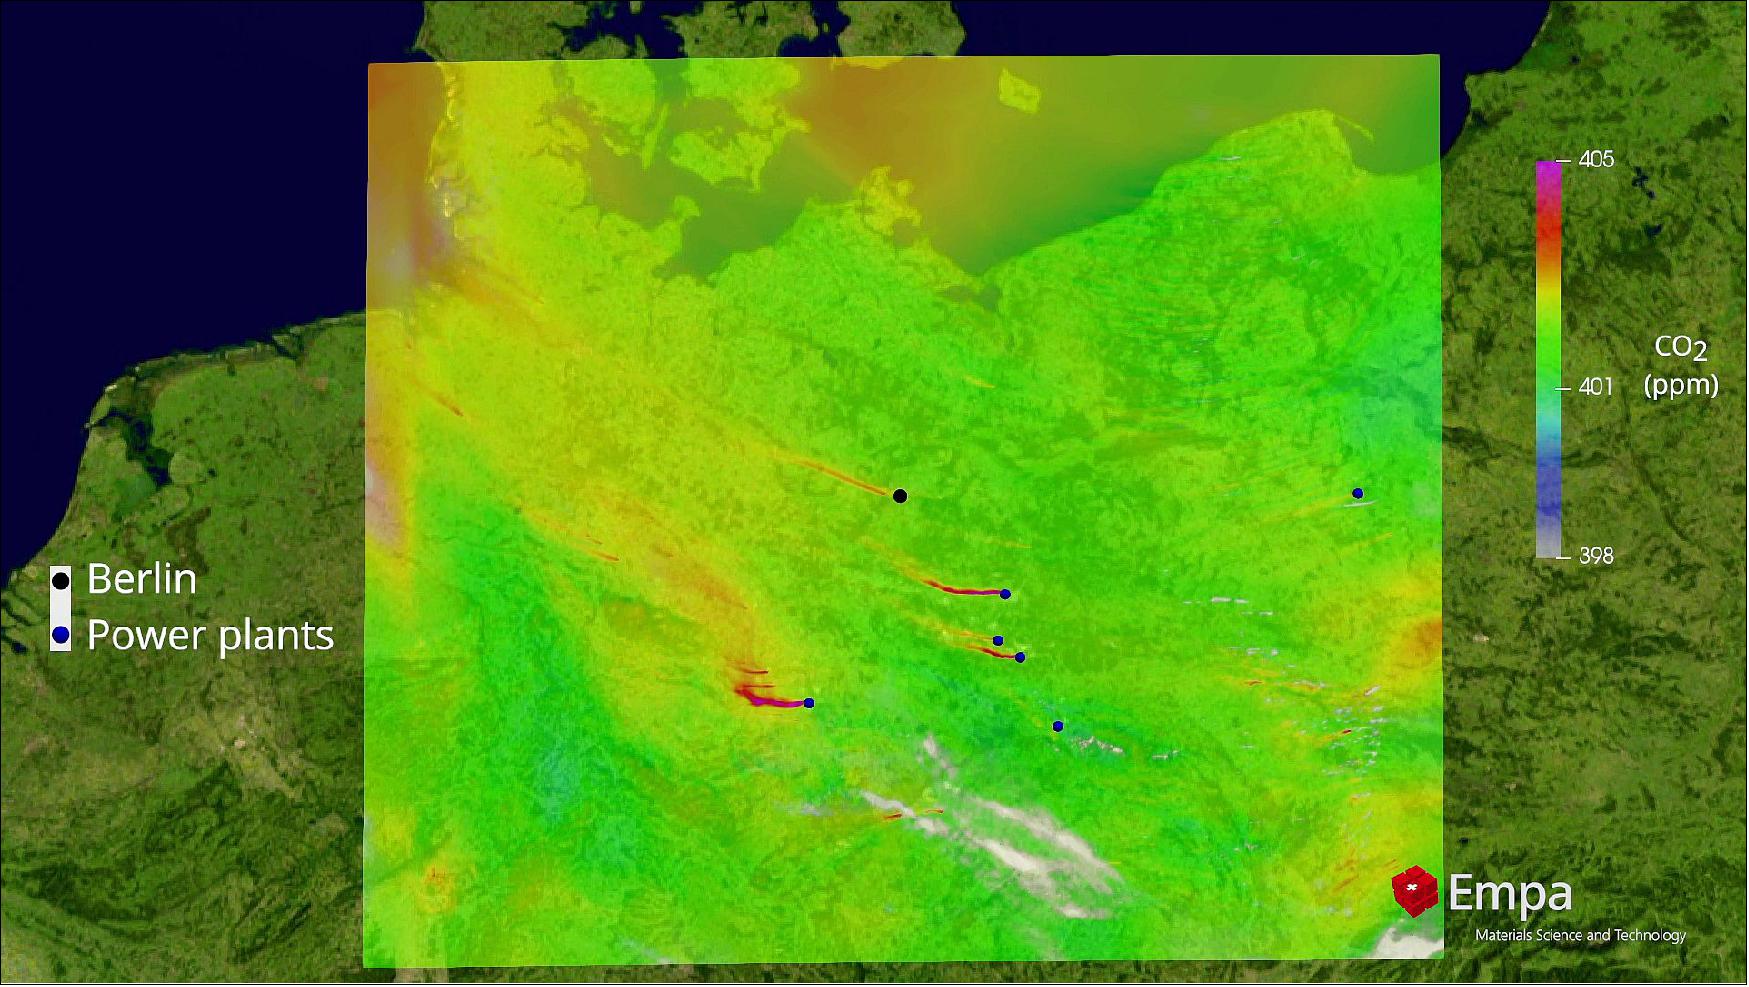 Figure 7: High-resolution simulation of total column carbon dioxide plumes from Berlin and nearby power plants on 2 July 2015. The data were generated by Empa, as part of the ESA-funded Smartcarb study (image credit: Empa, Swiss Federal Laboratories for Materials Science and Technology)